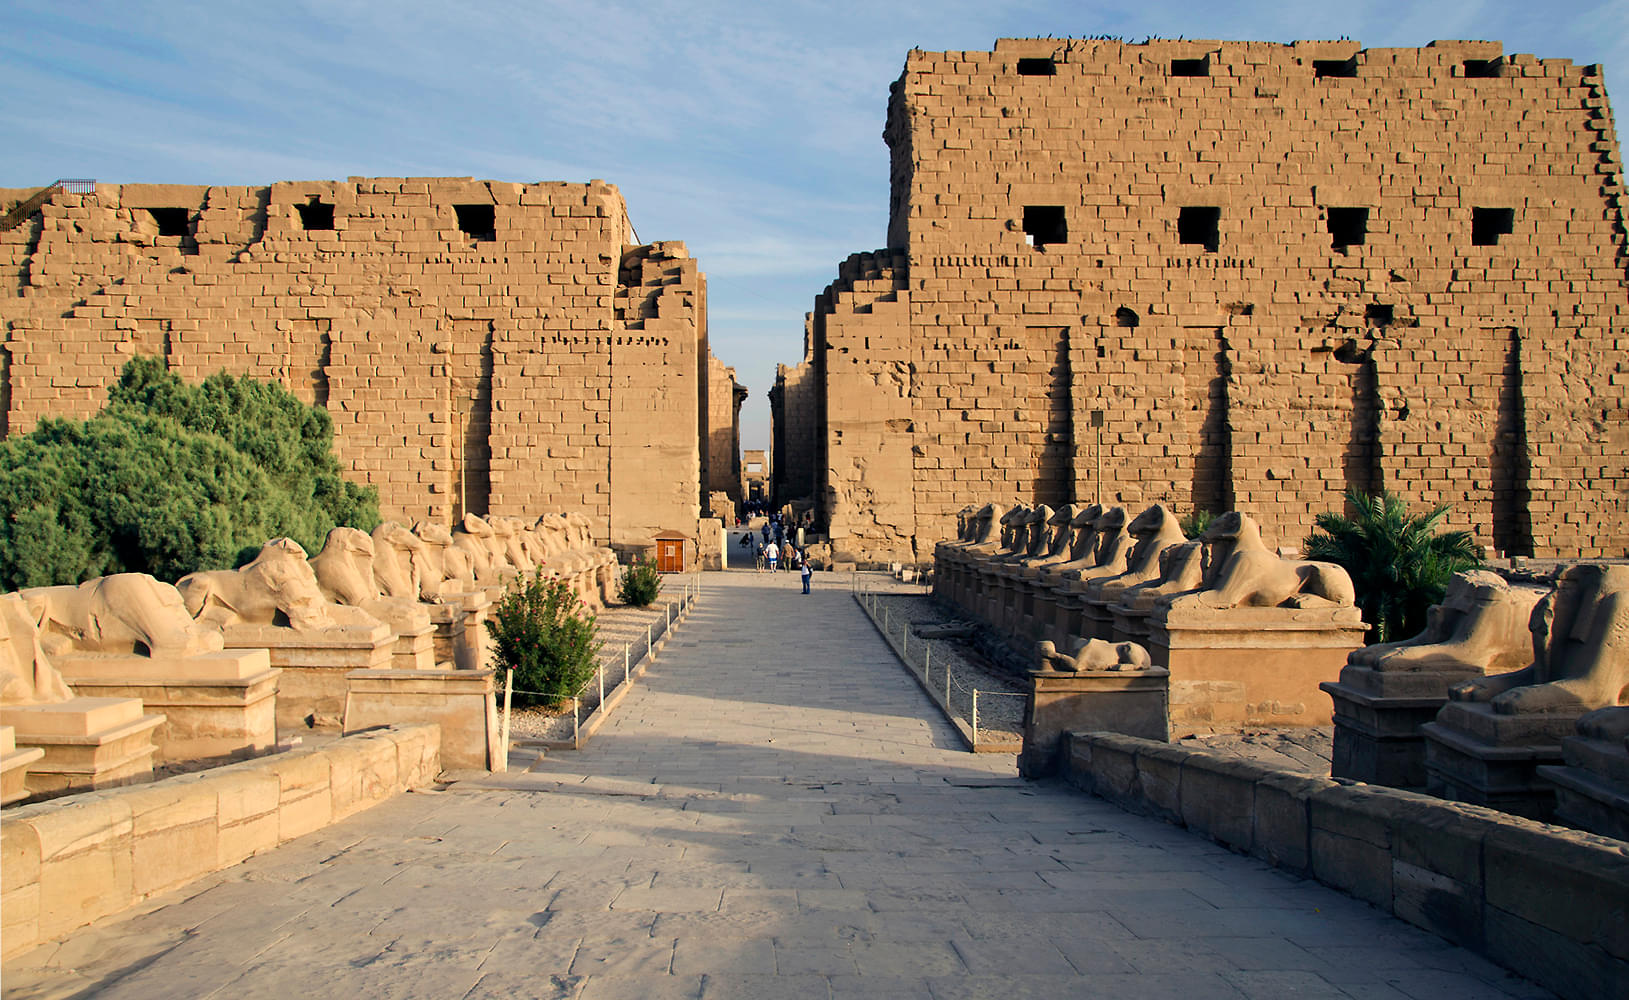 Temple of Amun-Re Luxor Overview